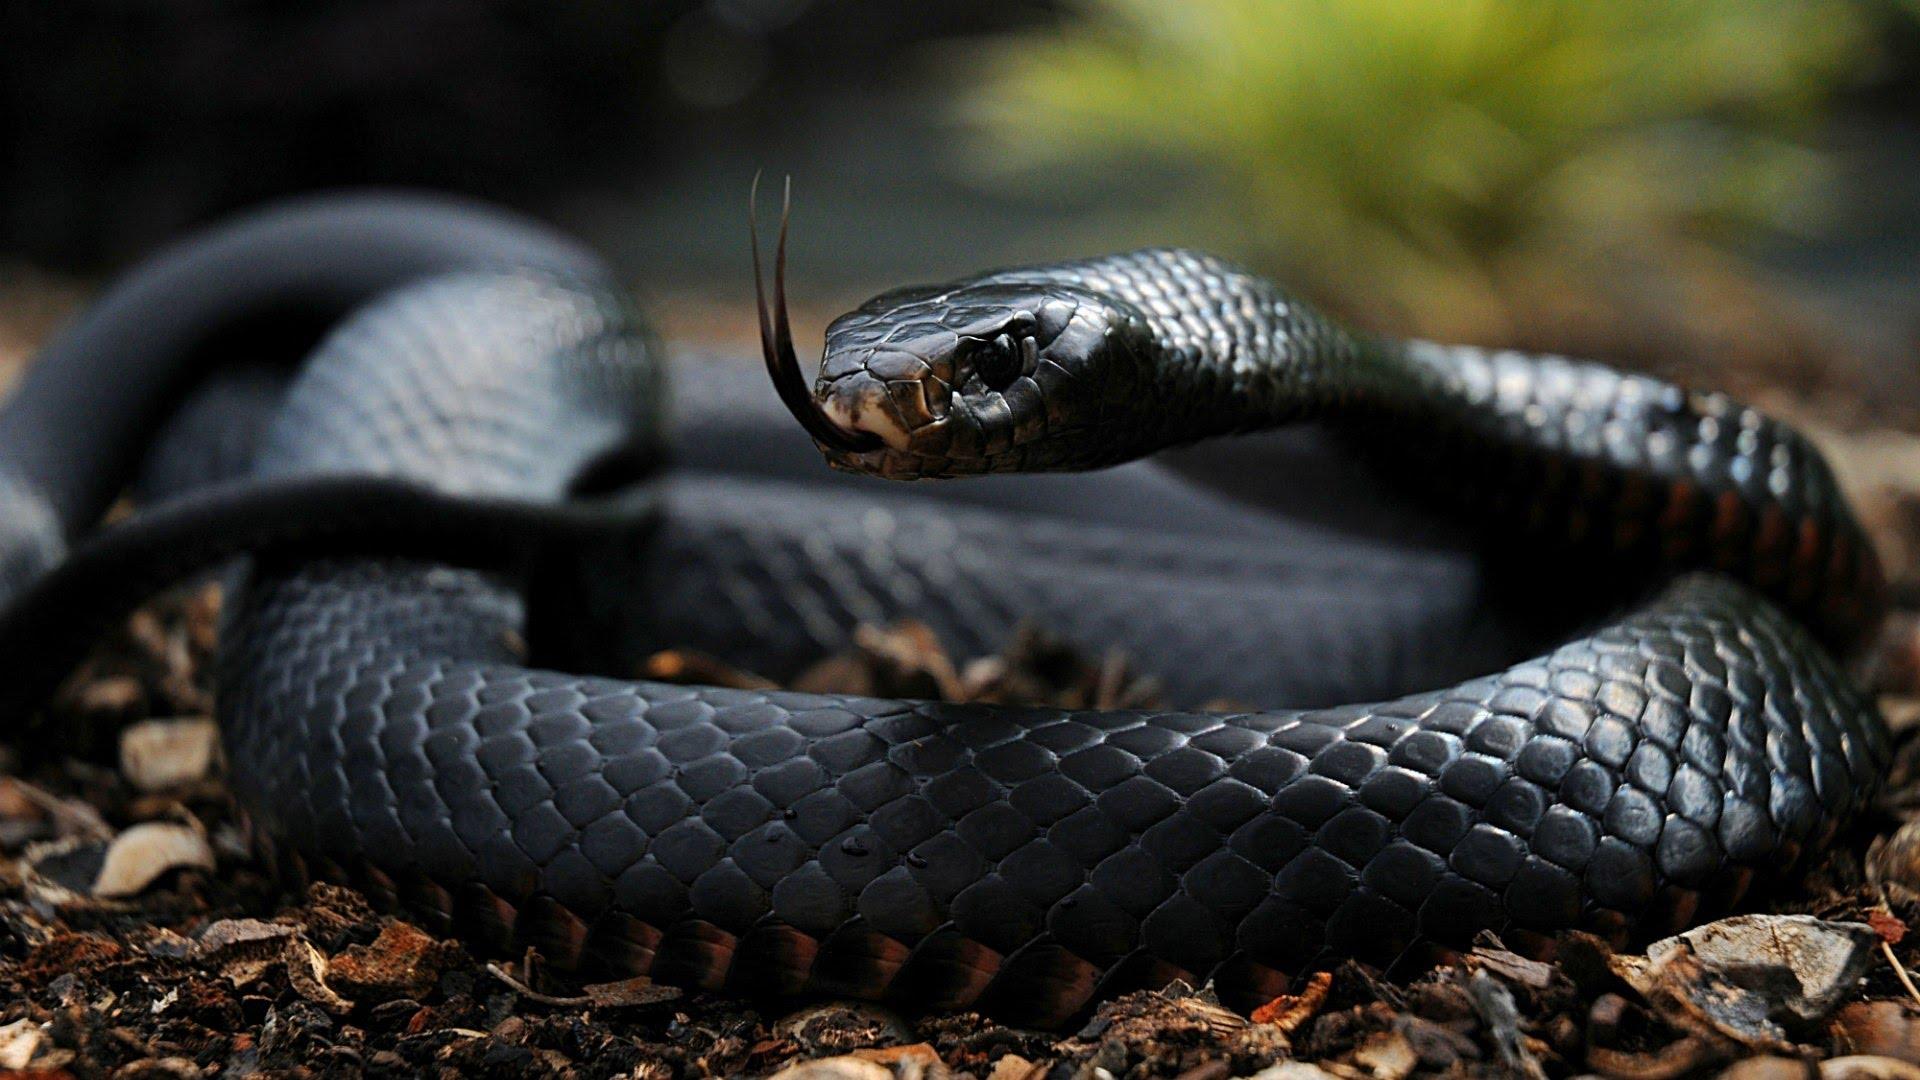 Most Poisonous Snakes HD Wallpaper, Background Image